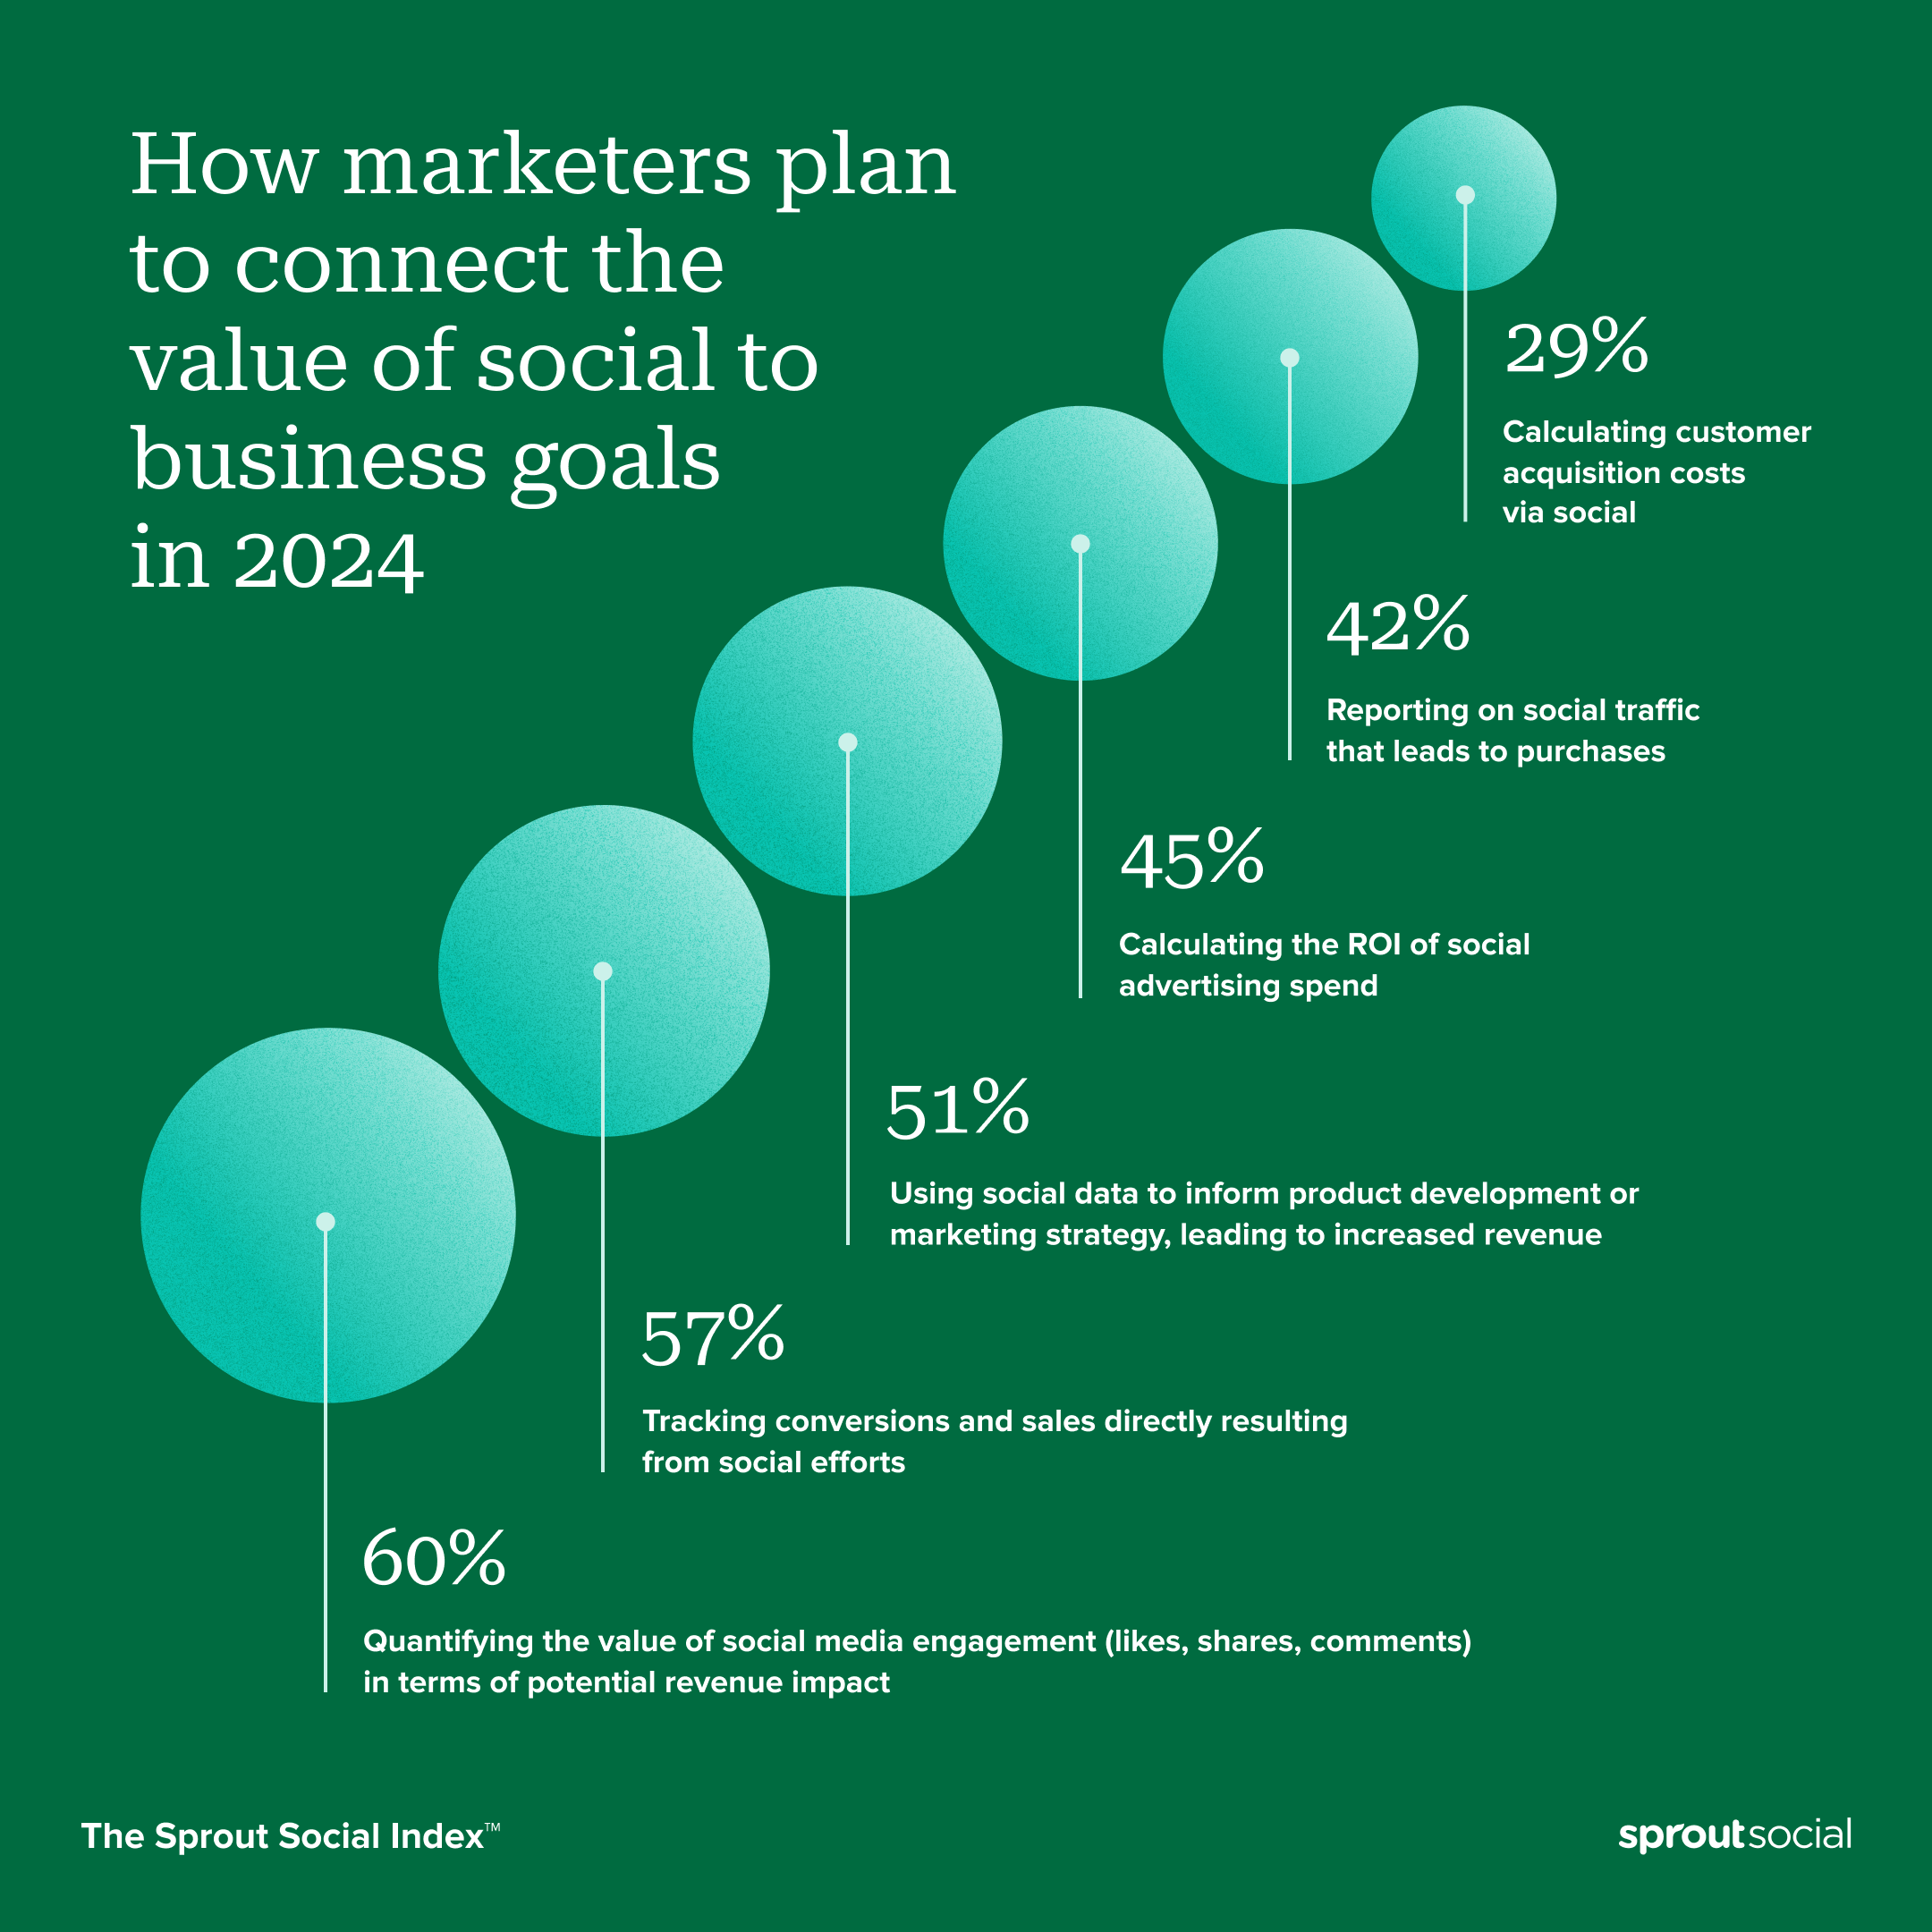 A chart from The Sprout Social Index™ that illustrates the different ways marketers plan to connect the value of social to business goals in 2024. The top response was "quantifying the value of social media engagement (likes, shares, comments) in terms of potential revenue impact," with 60% of marketers selecting that option.